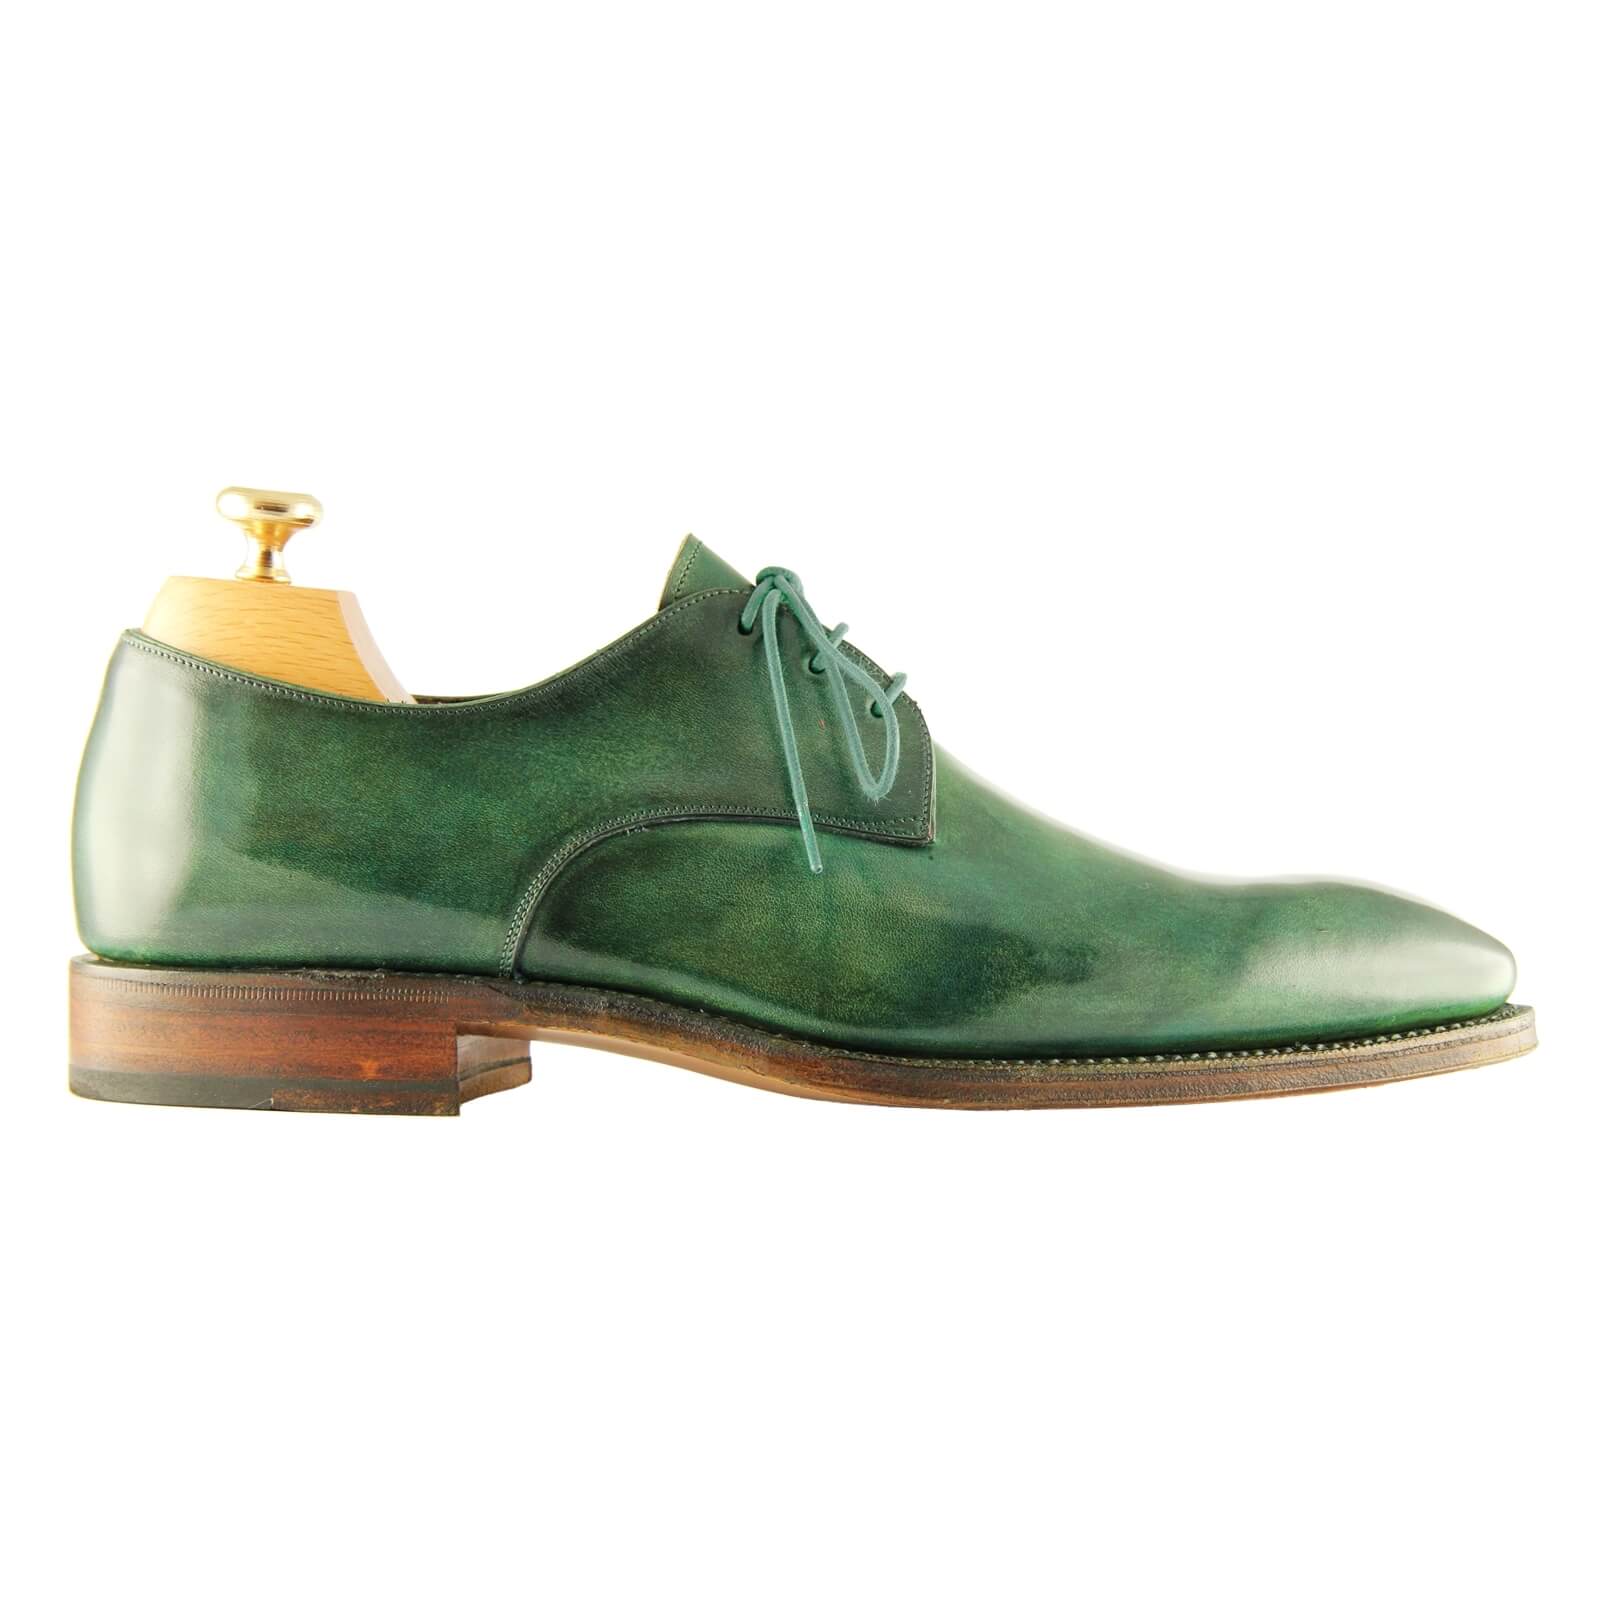 Leather shoe patina: graceful ageing for your shoes